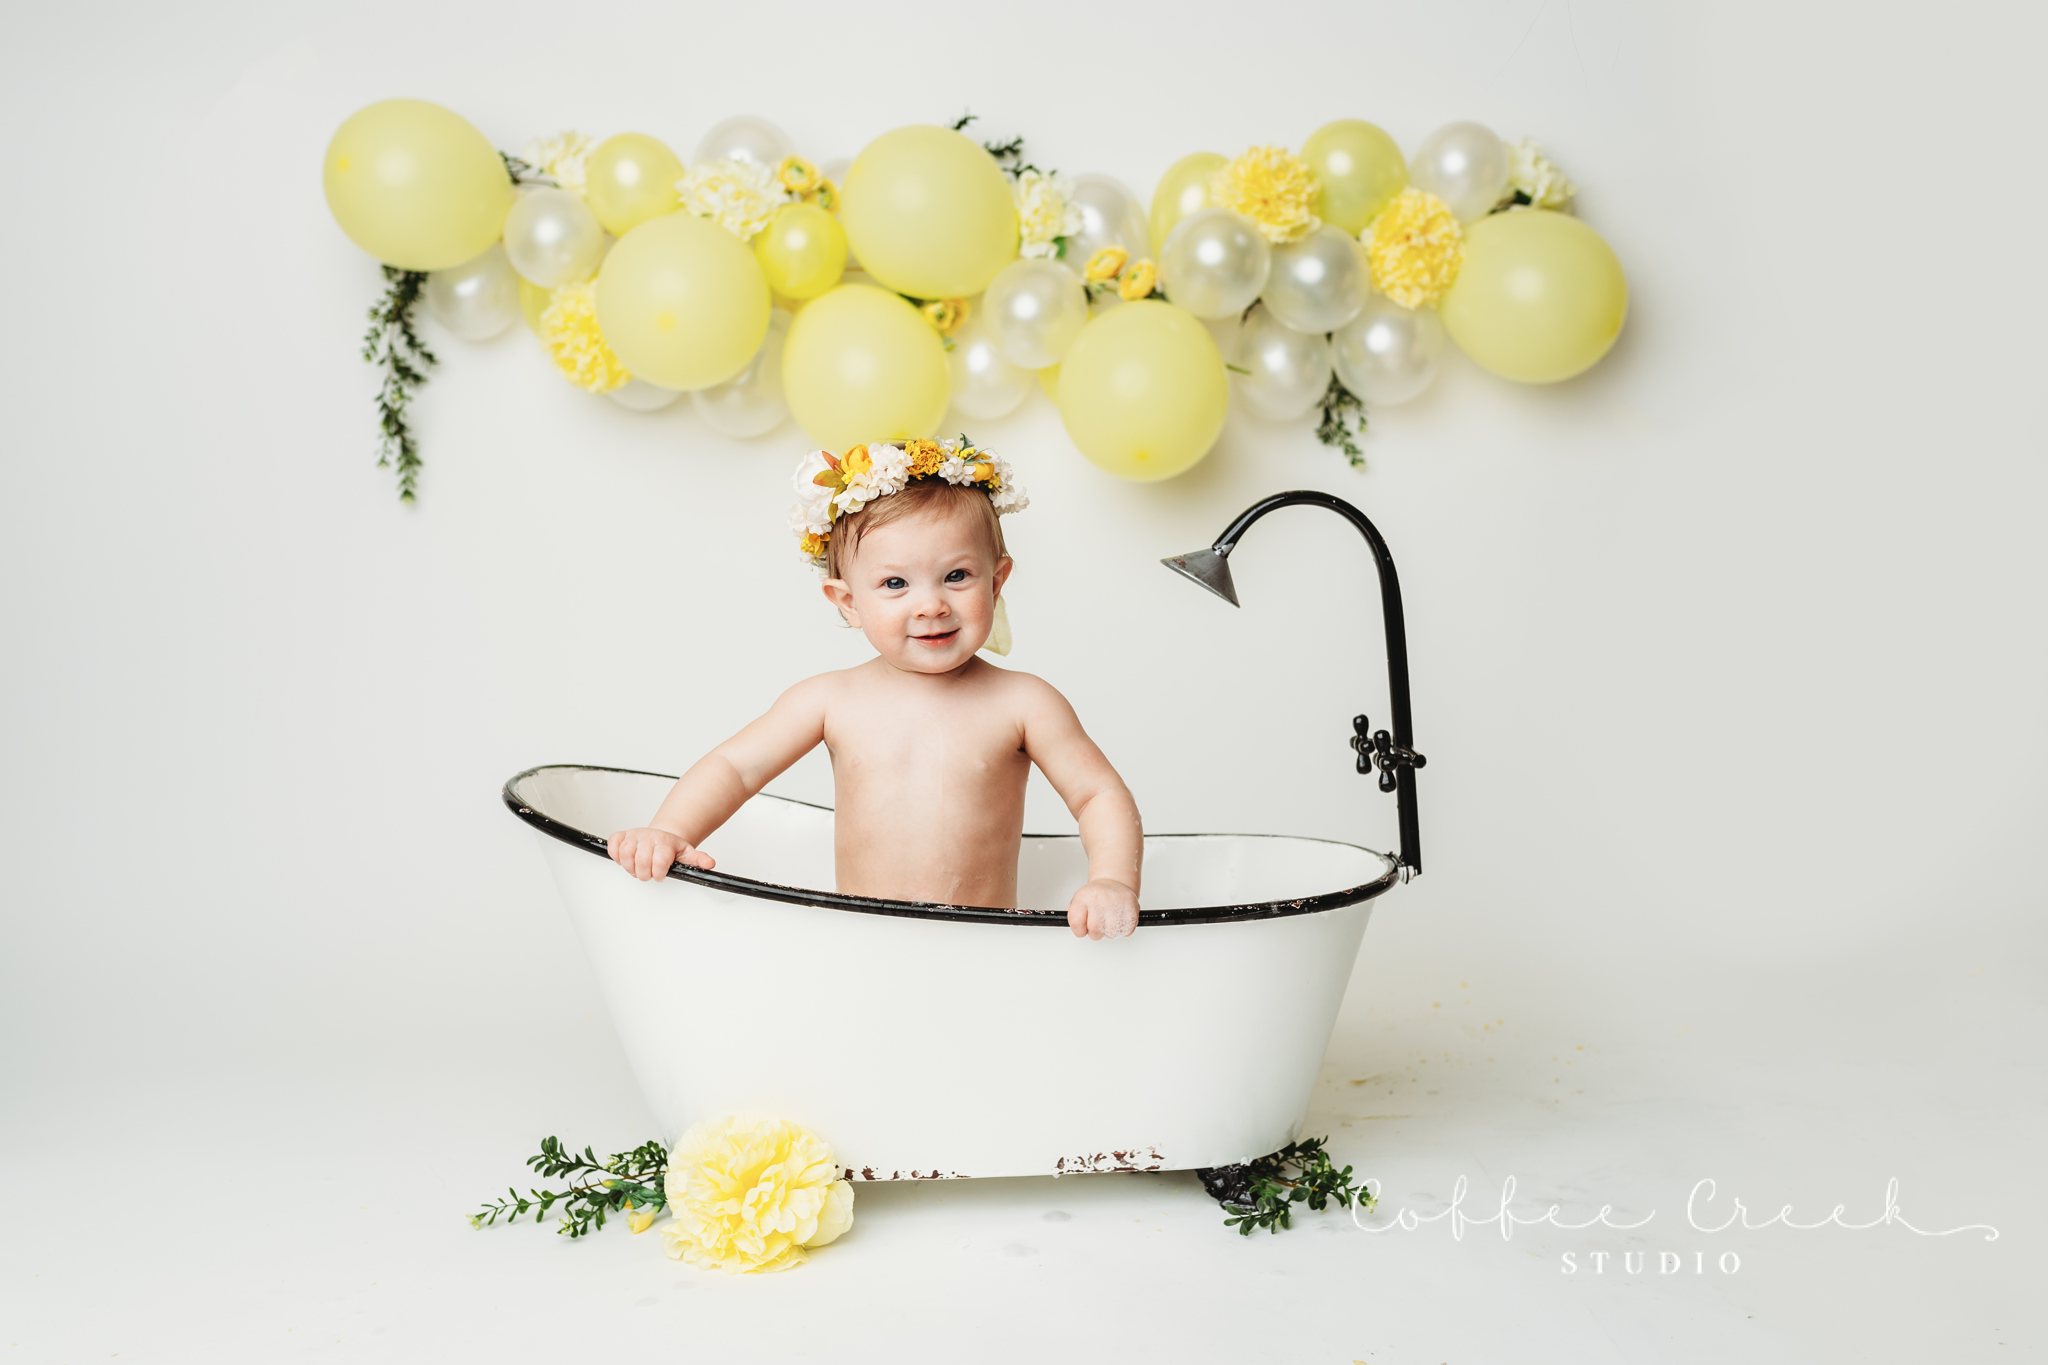 one year old in vintage bathtub with flowers and balloons